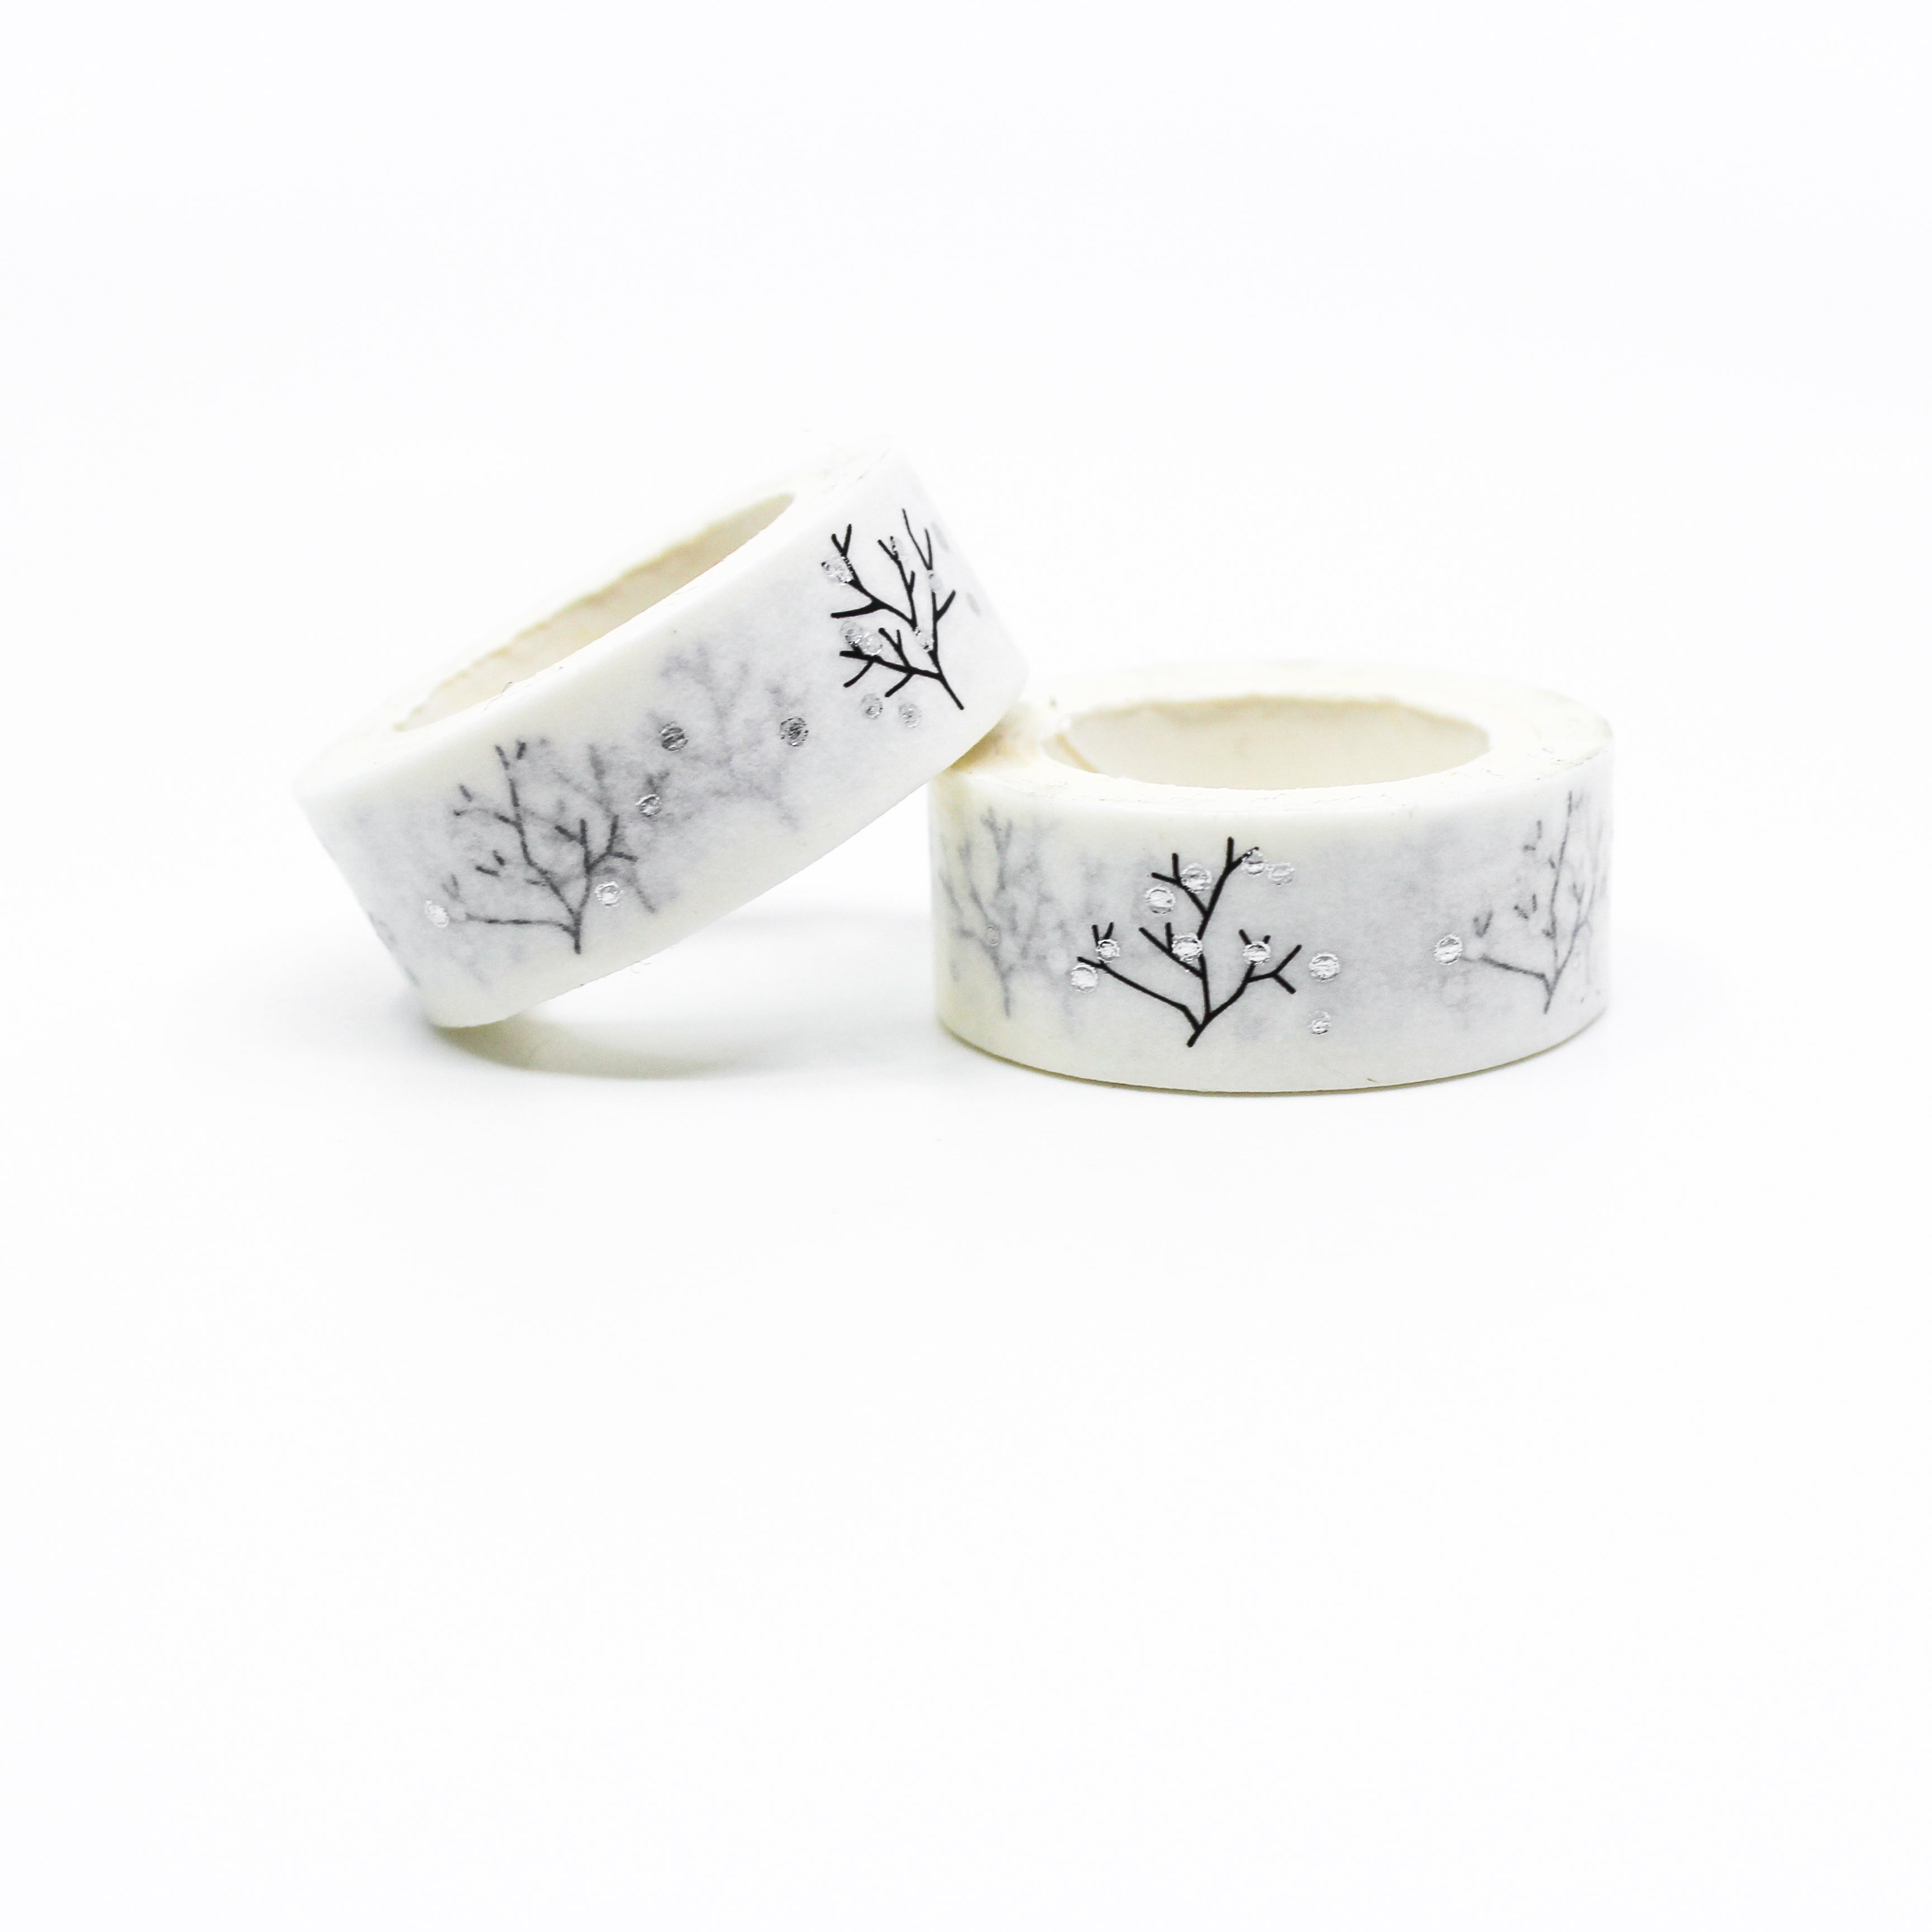 This is a black sprig with  silver color of leaves washi tapes from BBB Supplies Craft Shop